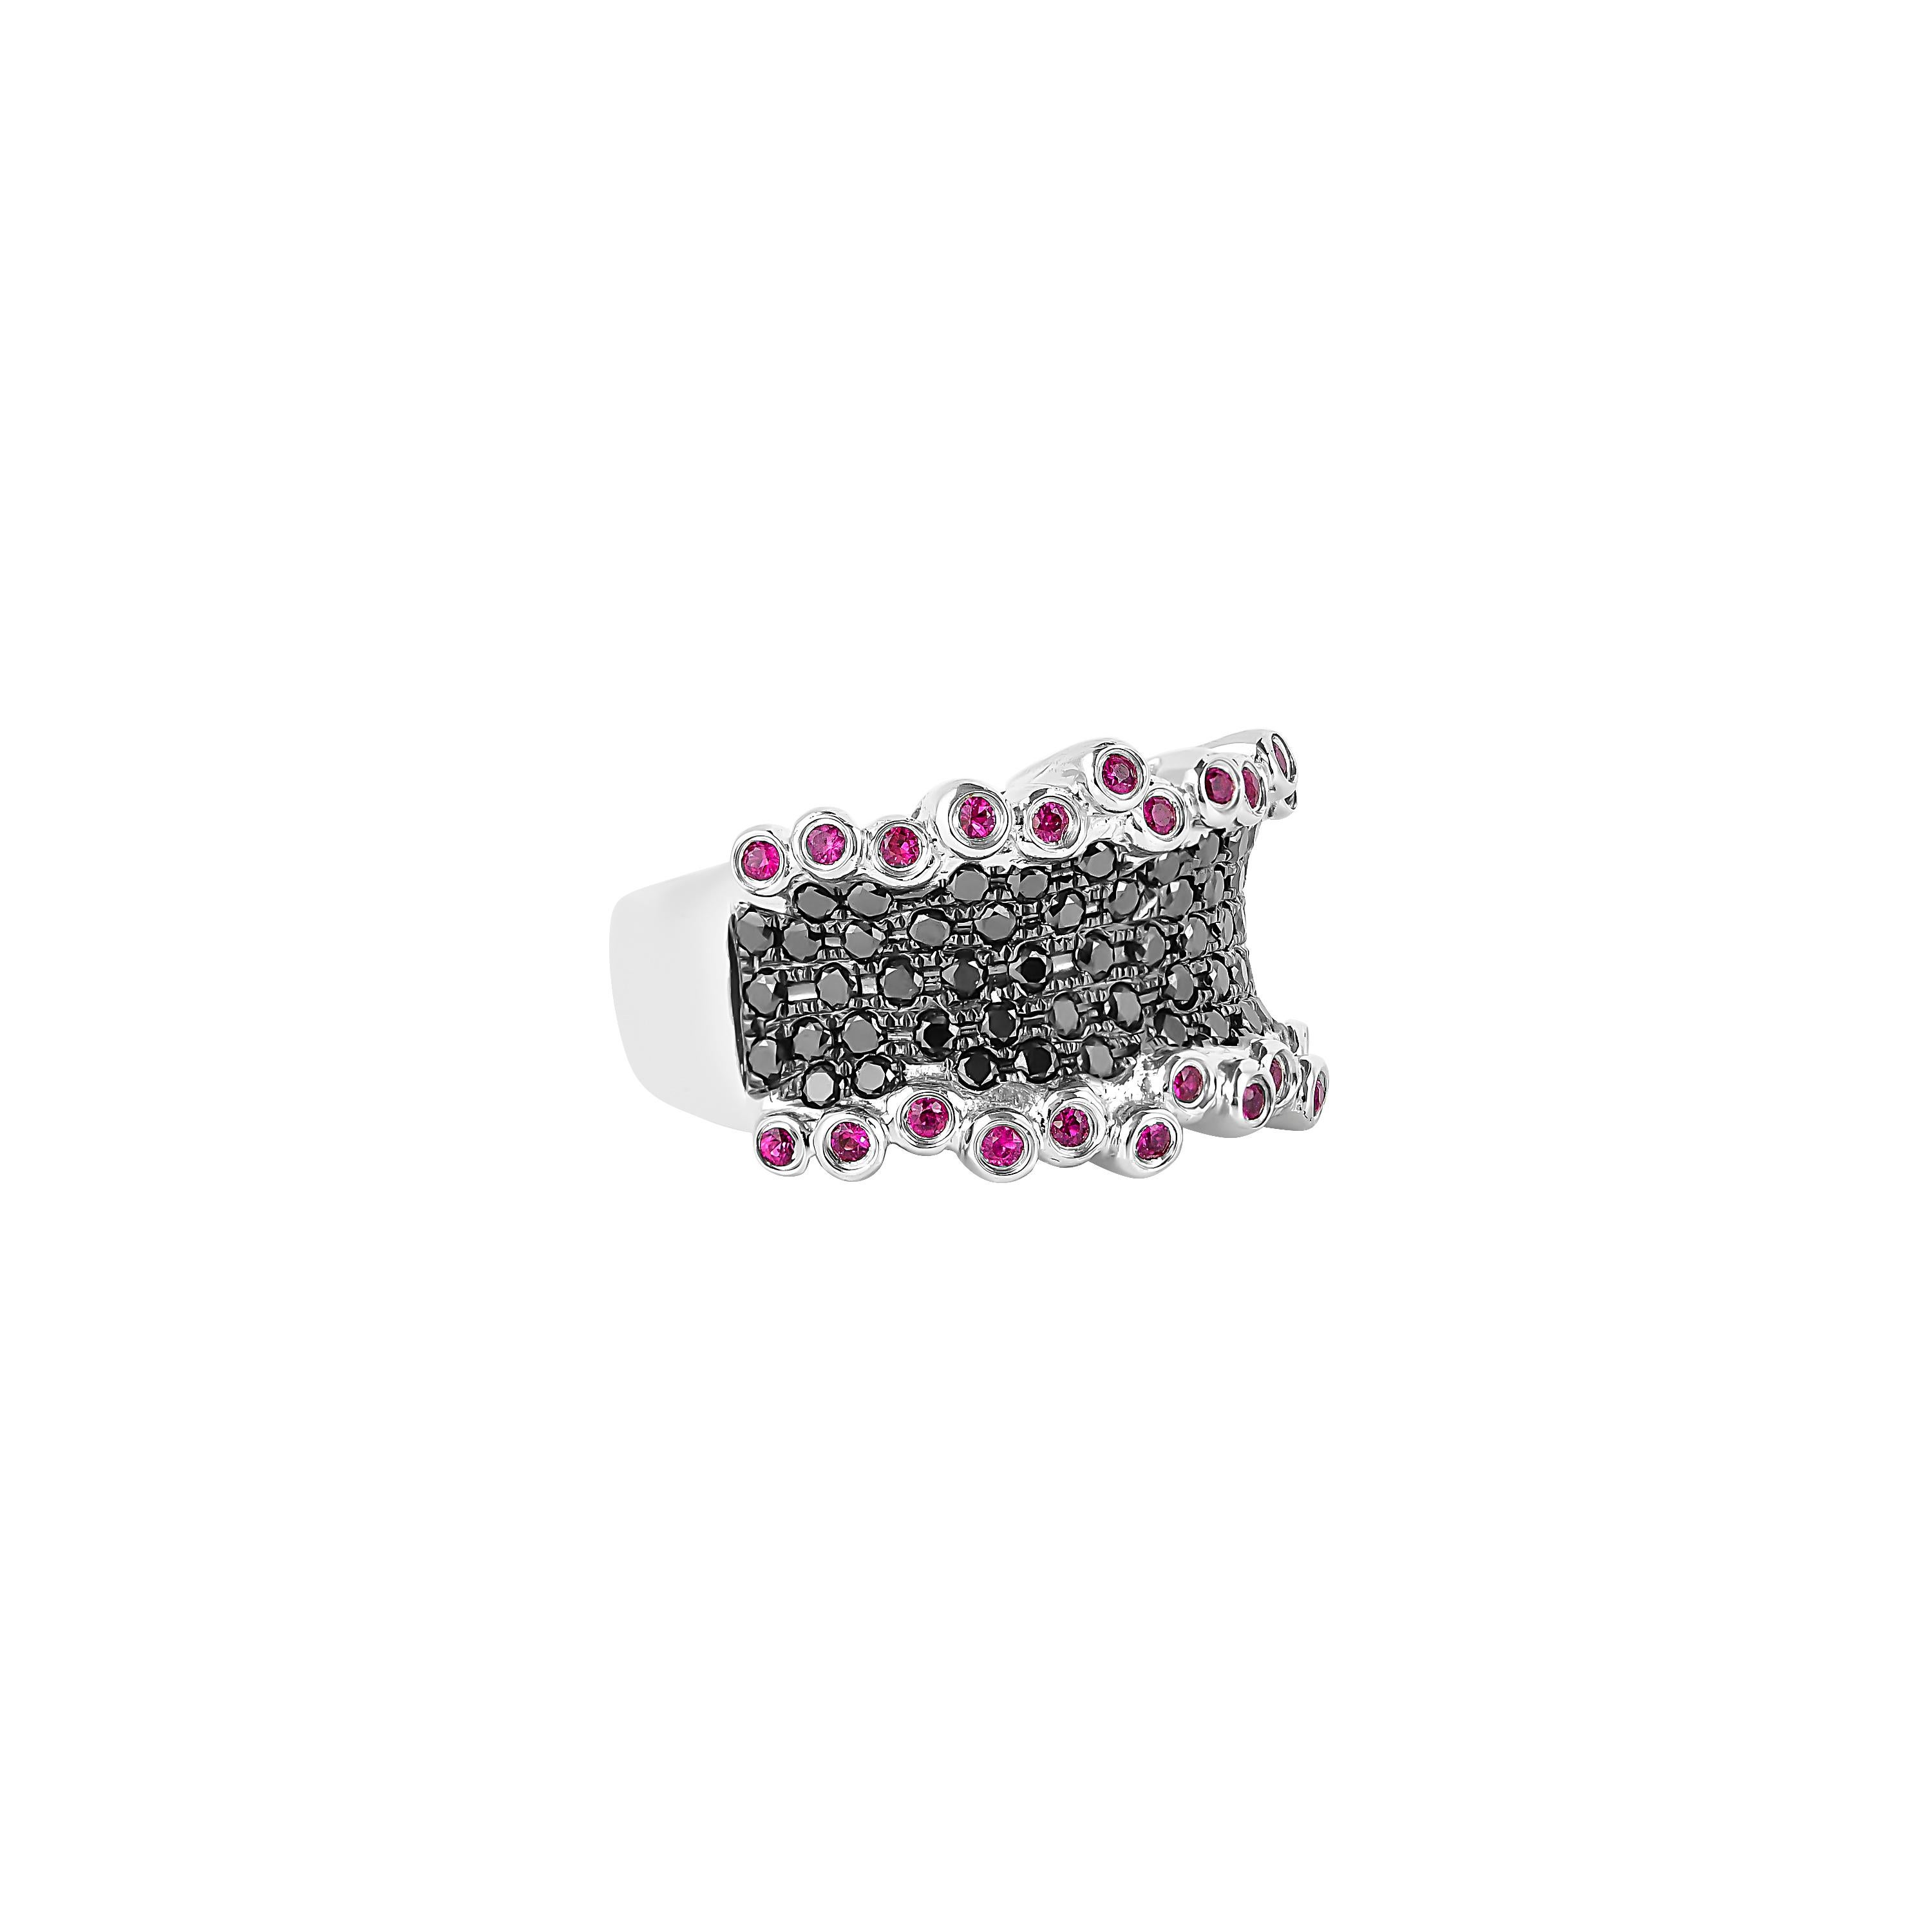 Sunita Nahata presents a collection of fancy cocktail rings with gorgeous gemstones. This ring uses a pave structure of black diamonds with architecturally aligned bezel set rubies. This unique and contrasting design presents a striking cocktail